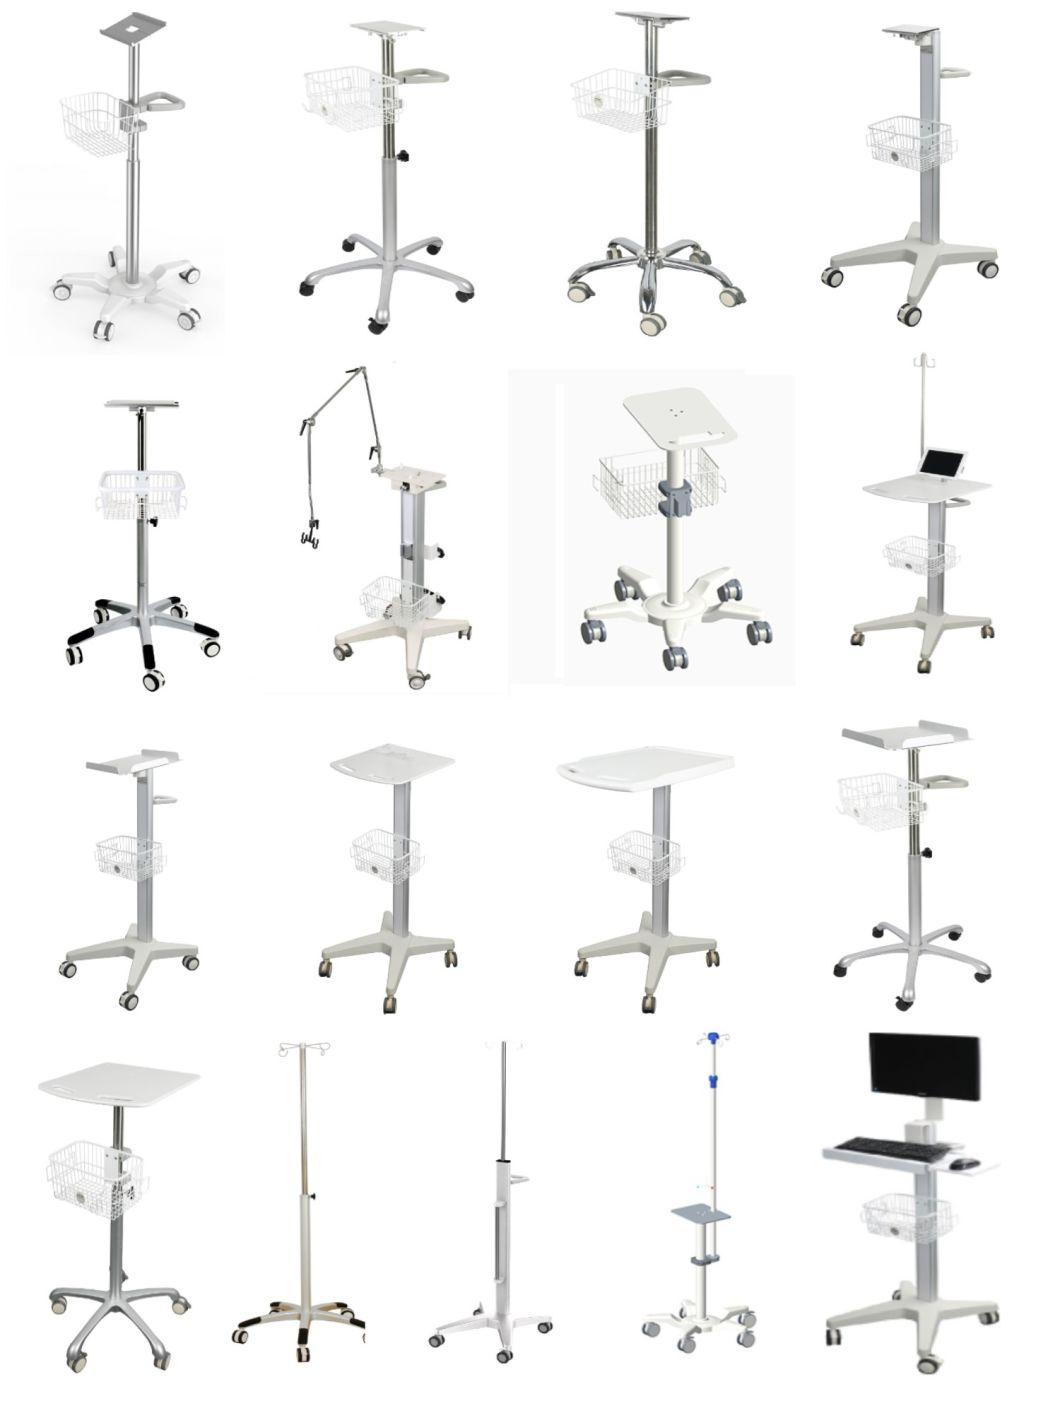 Compact and Flexible Hospital Monitor Stand Medical Tablet Cart